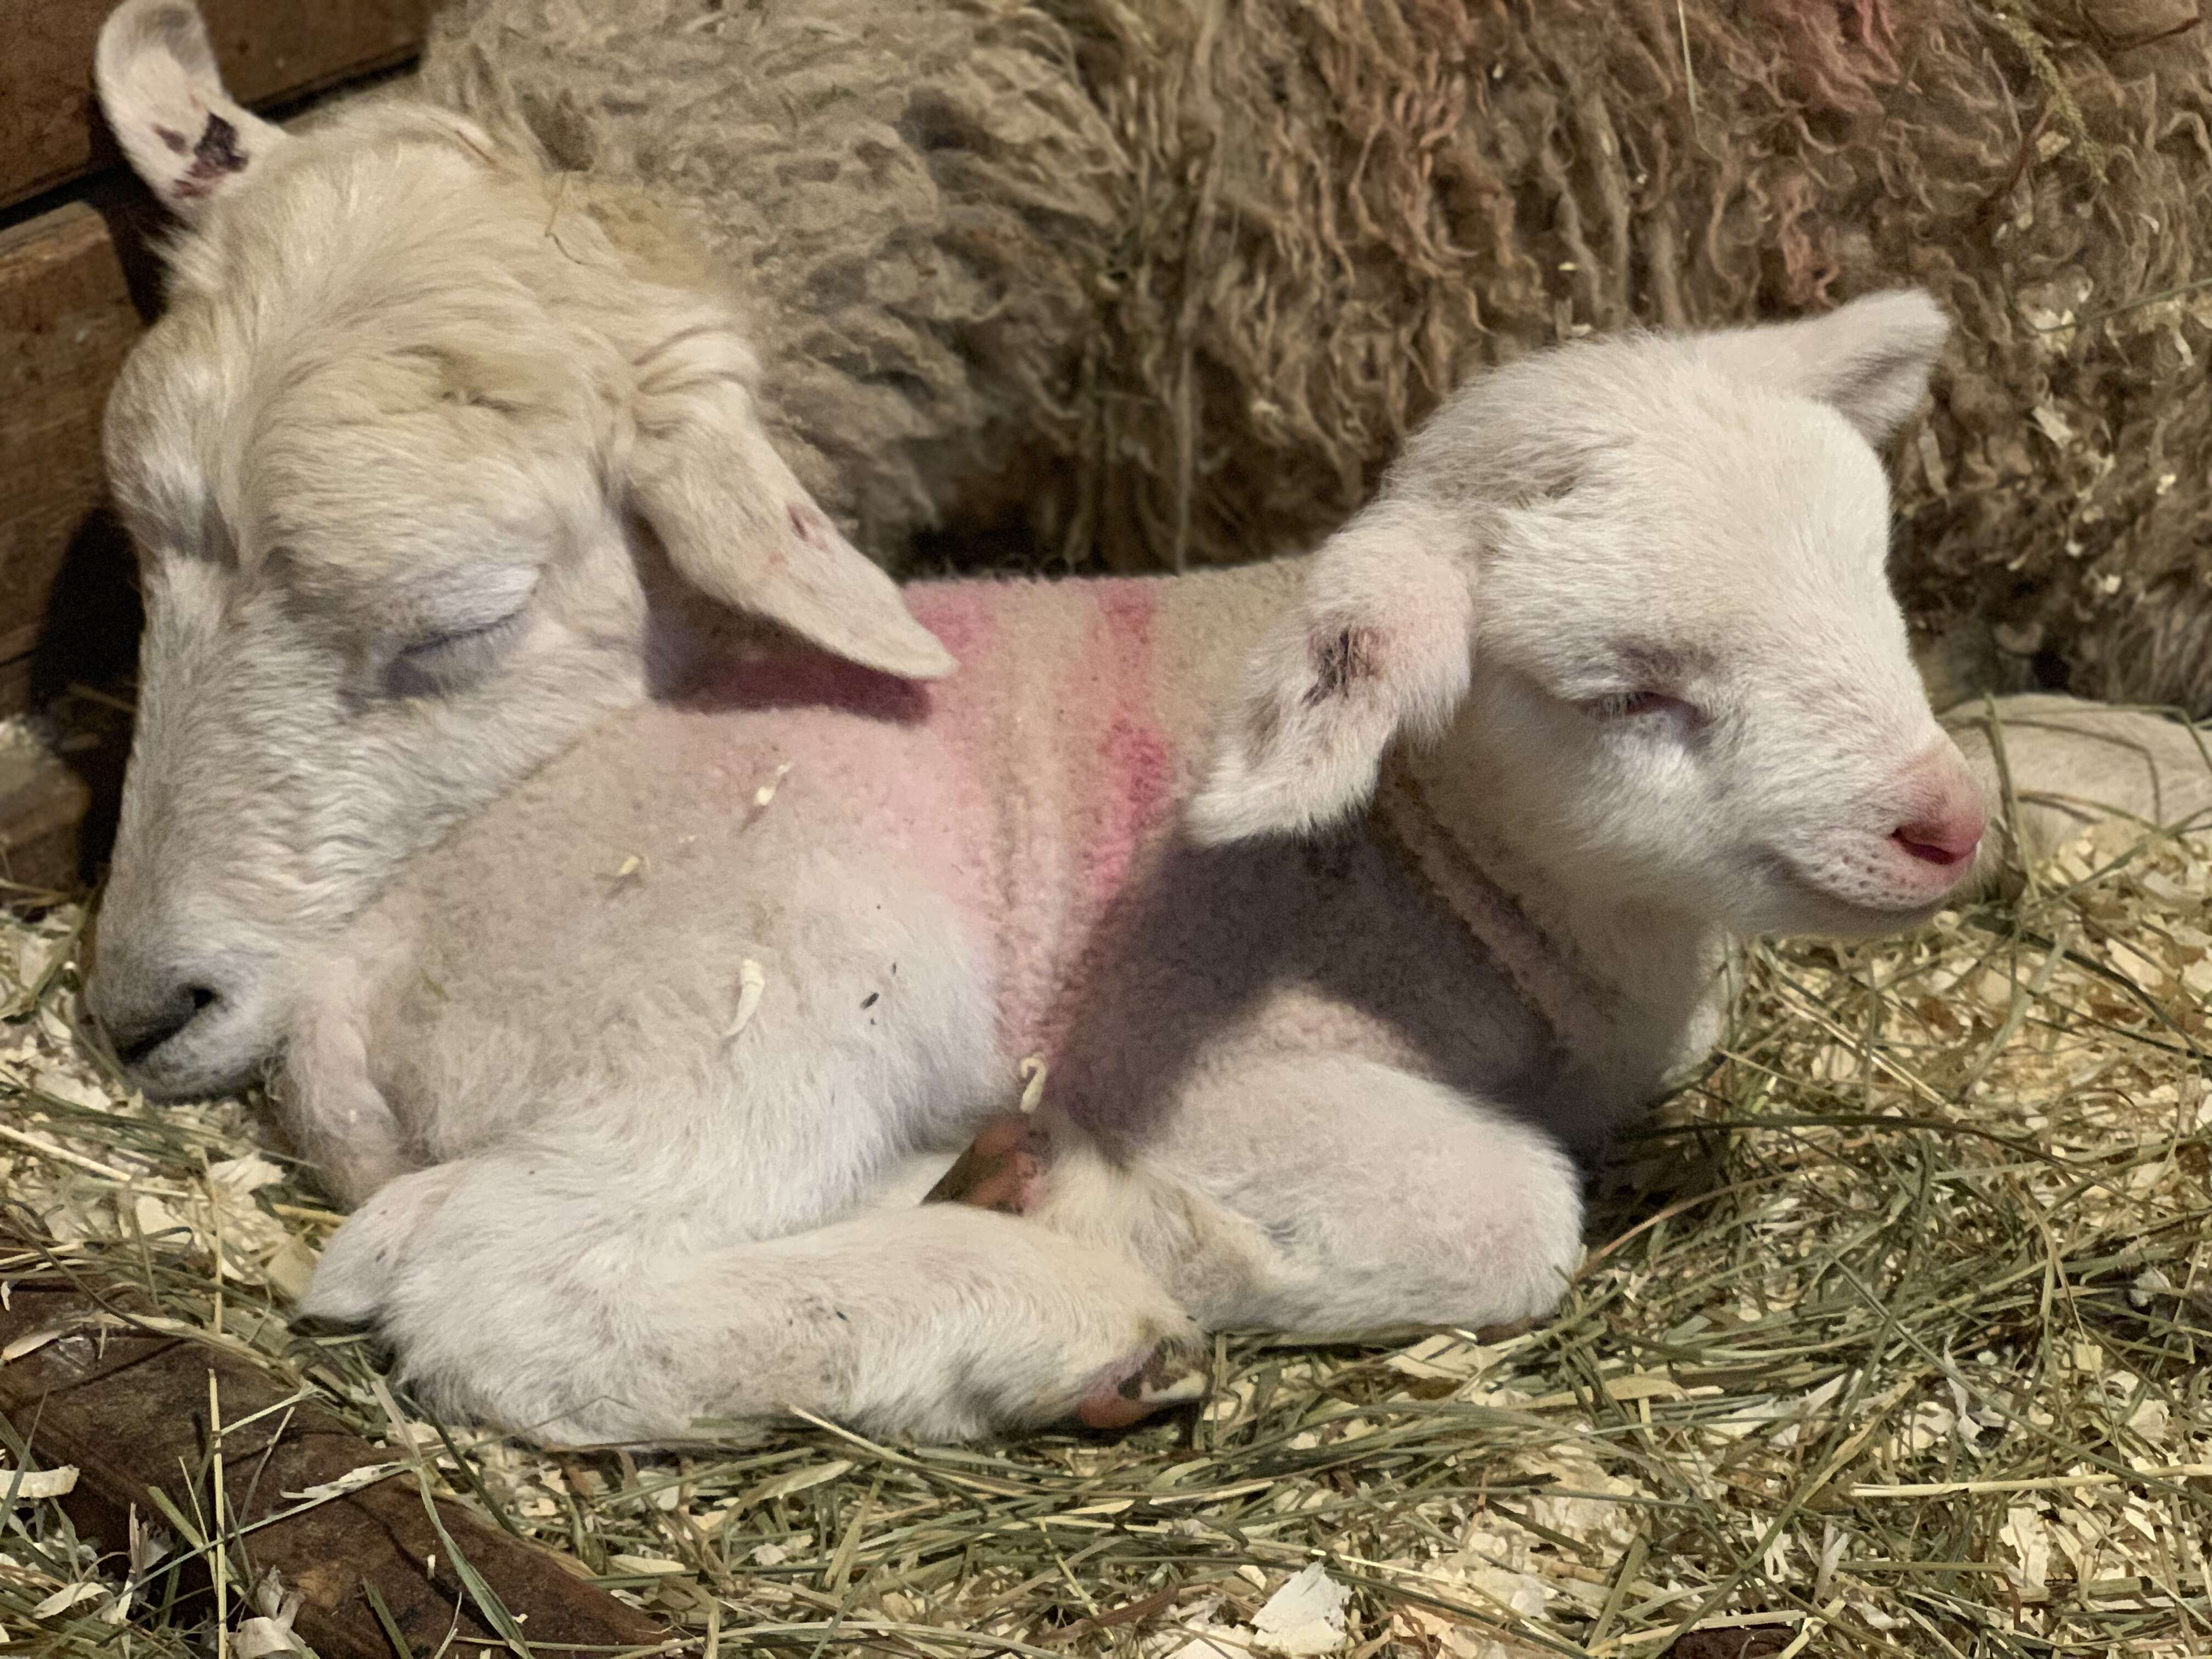 Mother sheep and baby lamb saved from Palm Sunday livestock auction